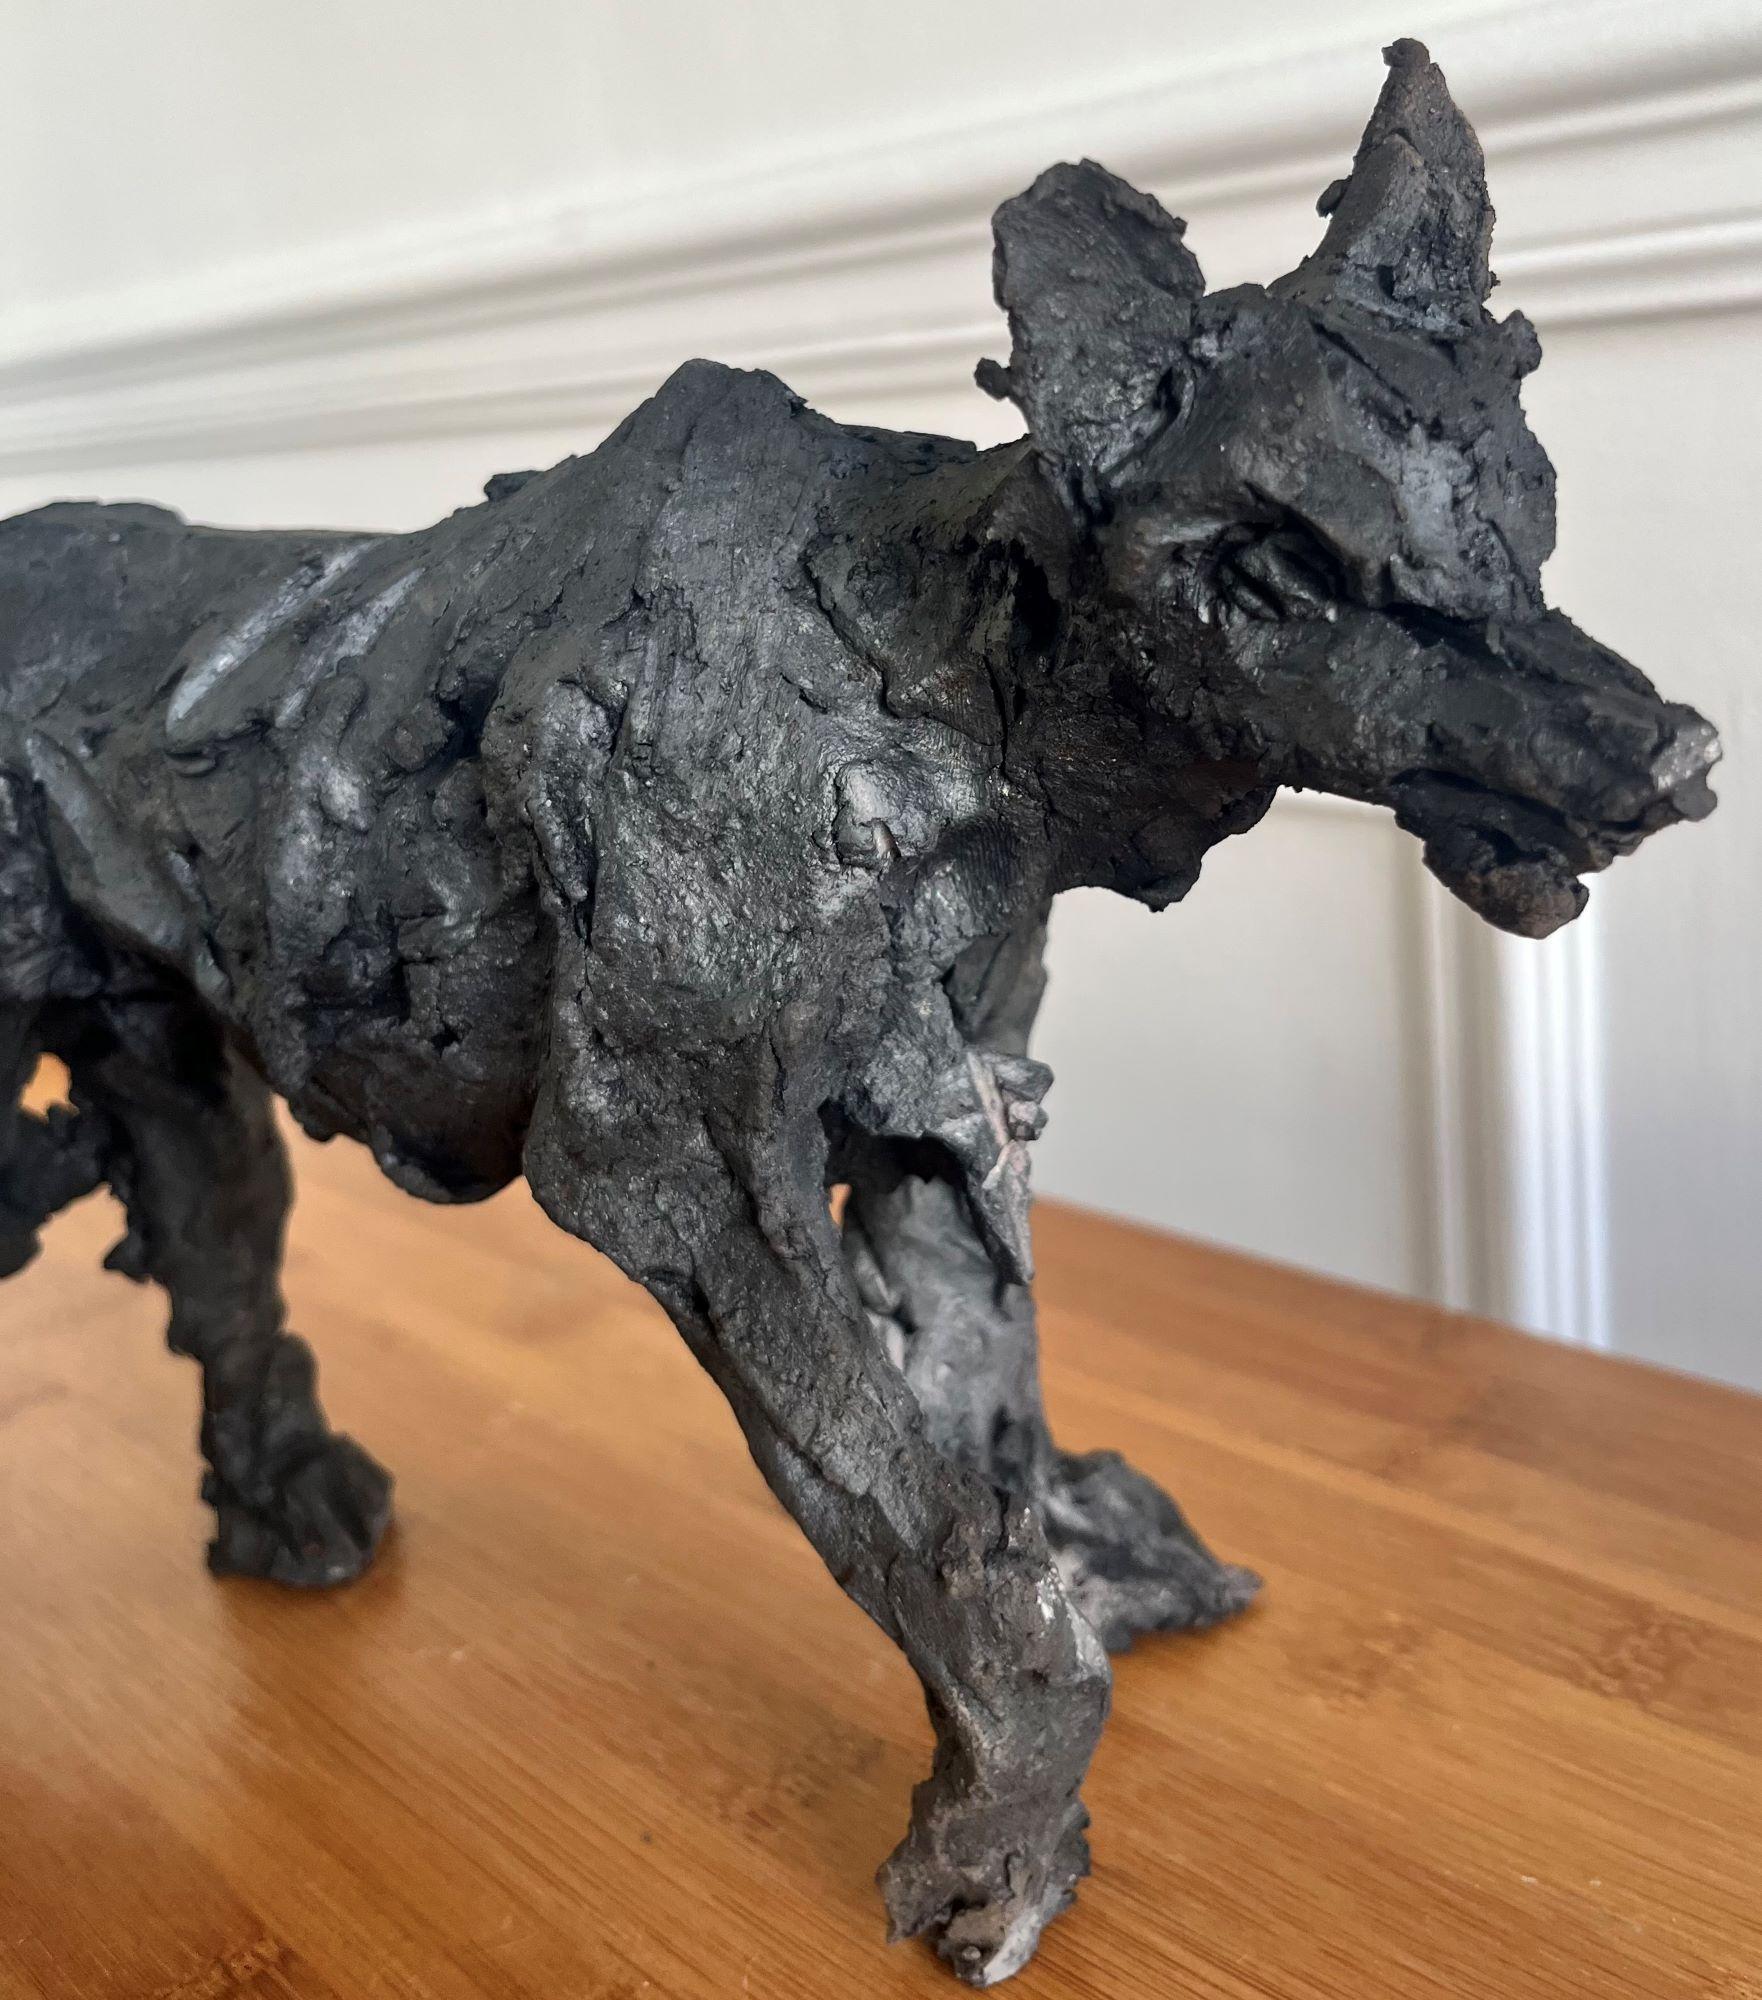 Wolf II is a unique smoke-fired sandstone sculpture by French contemporary artist Cécile Raynal, dimensions are 19 × 9 × 27 cm (7.5 × 3.5 × 10.6 in). 
This sculpture is unique and comes with an authenticity certificate.

Cécile Raynal uses sculpture